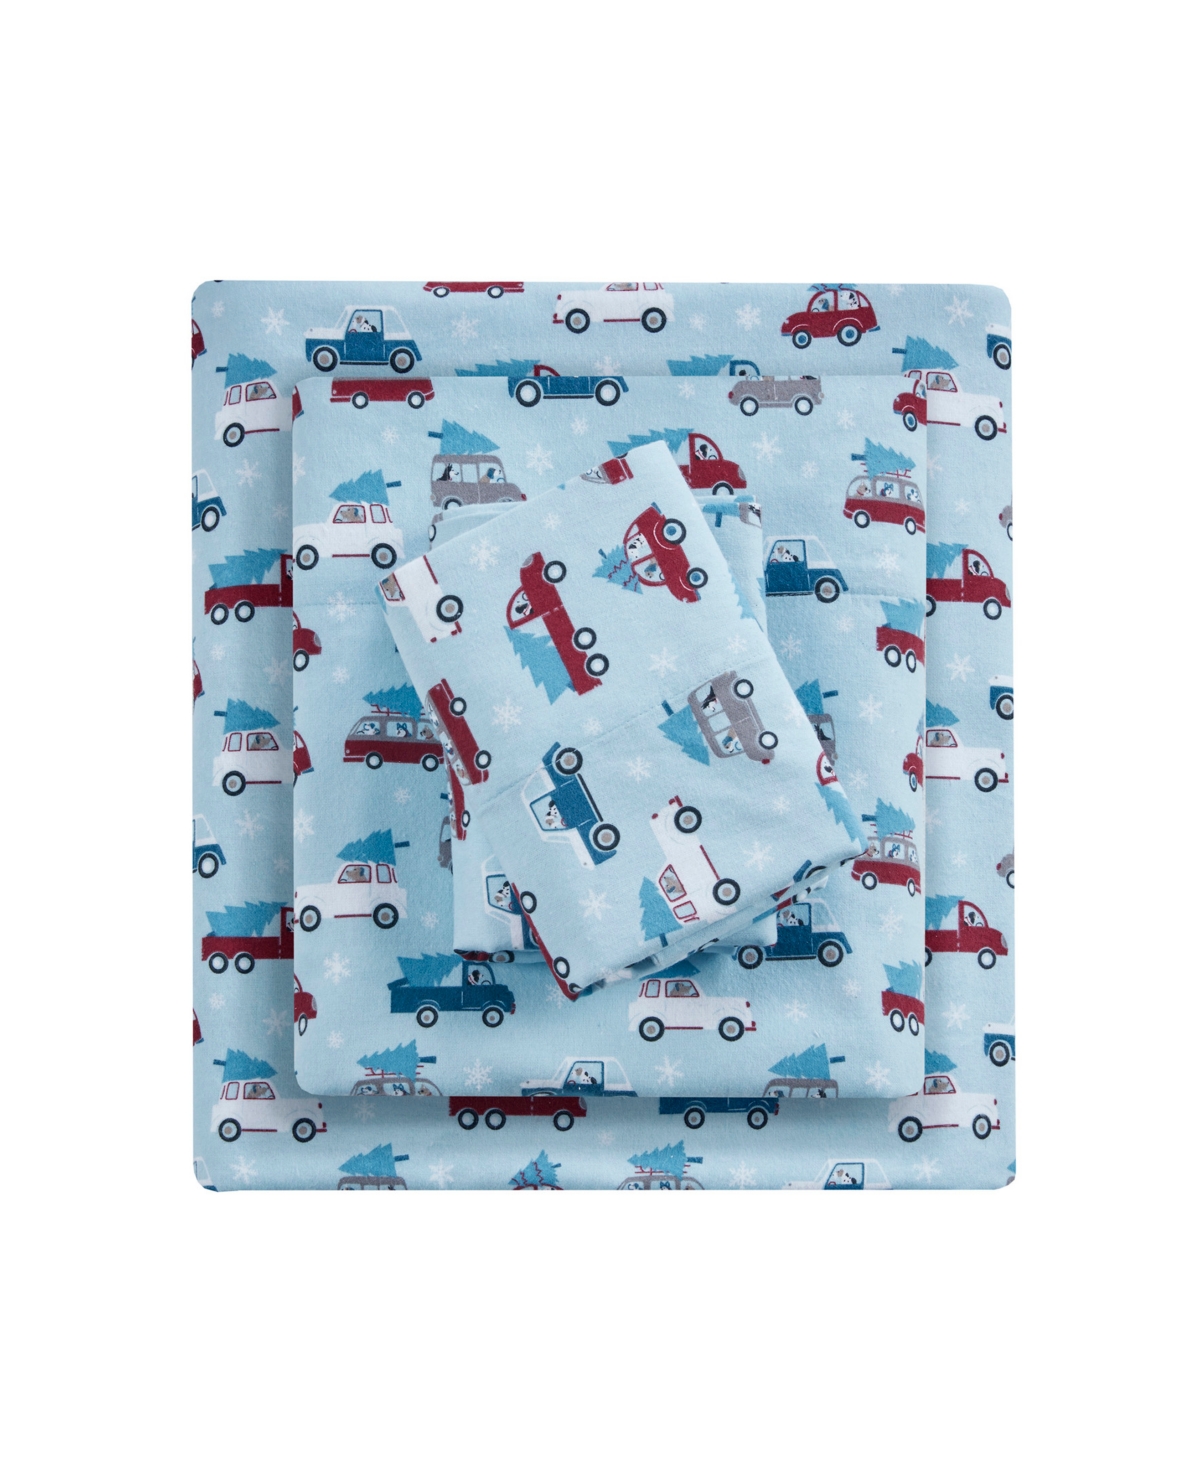 Sleep Philosophy True North By  Novelty Printed Cotton Flannel 4-pc. Sheet Set, Full In Blue Cars